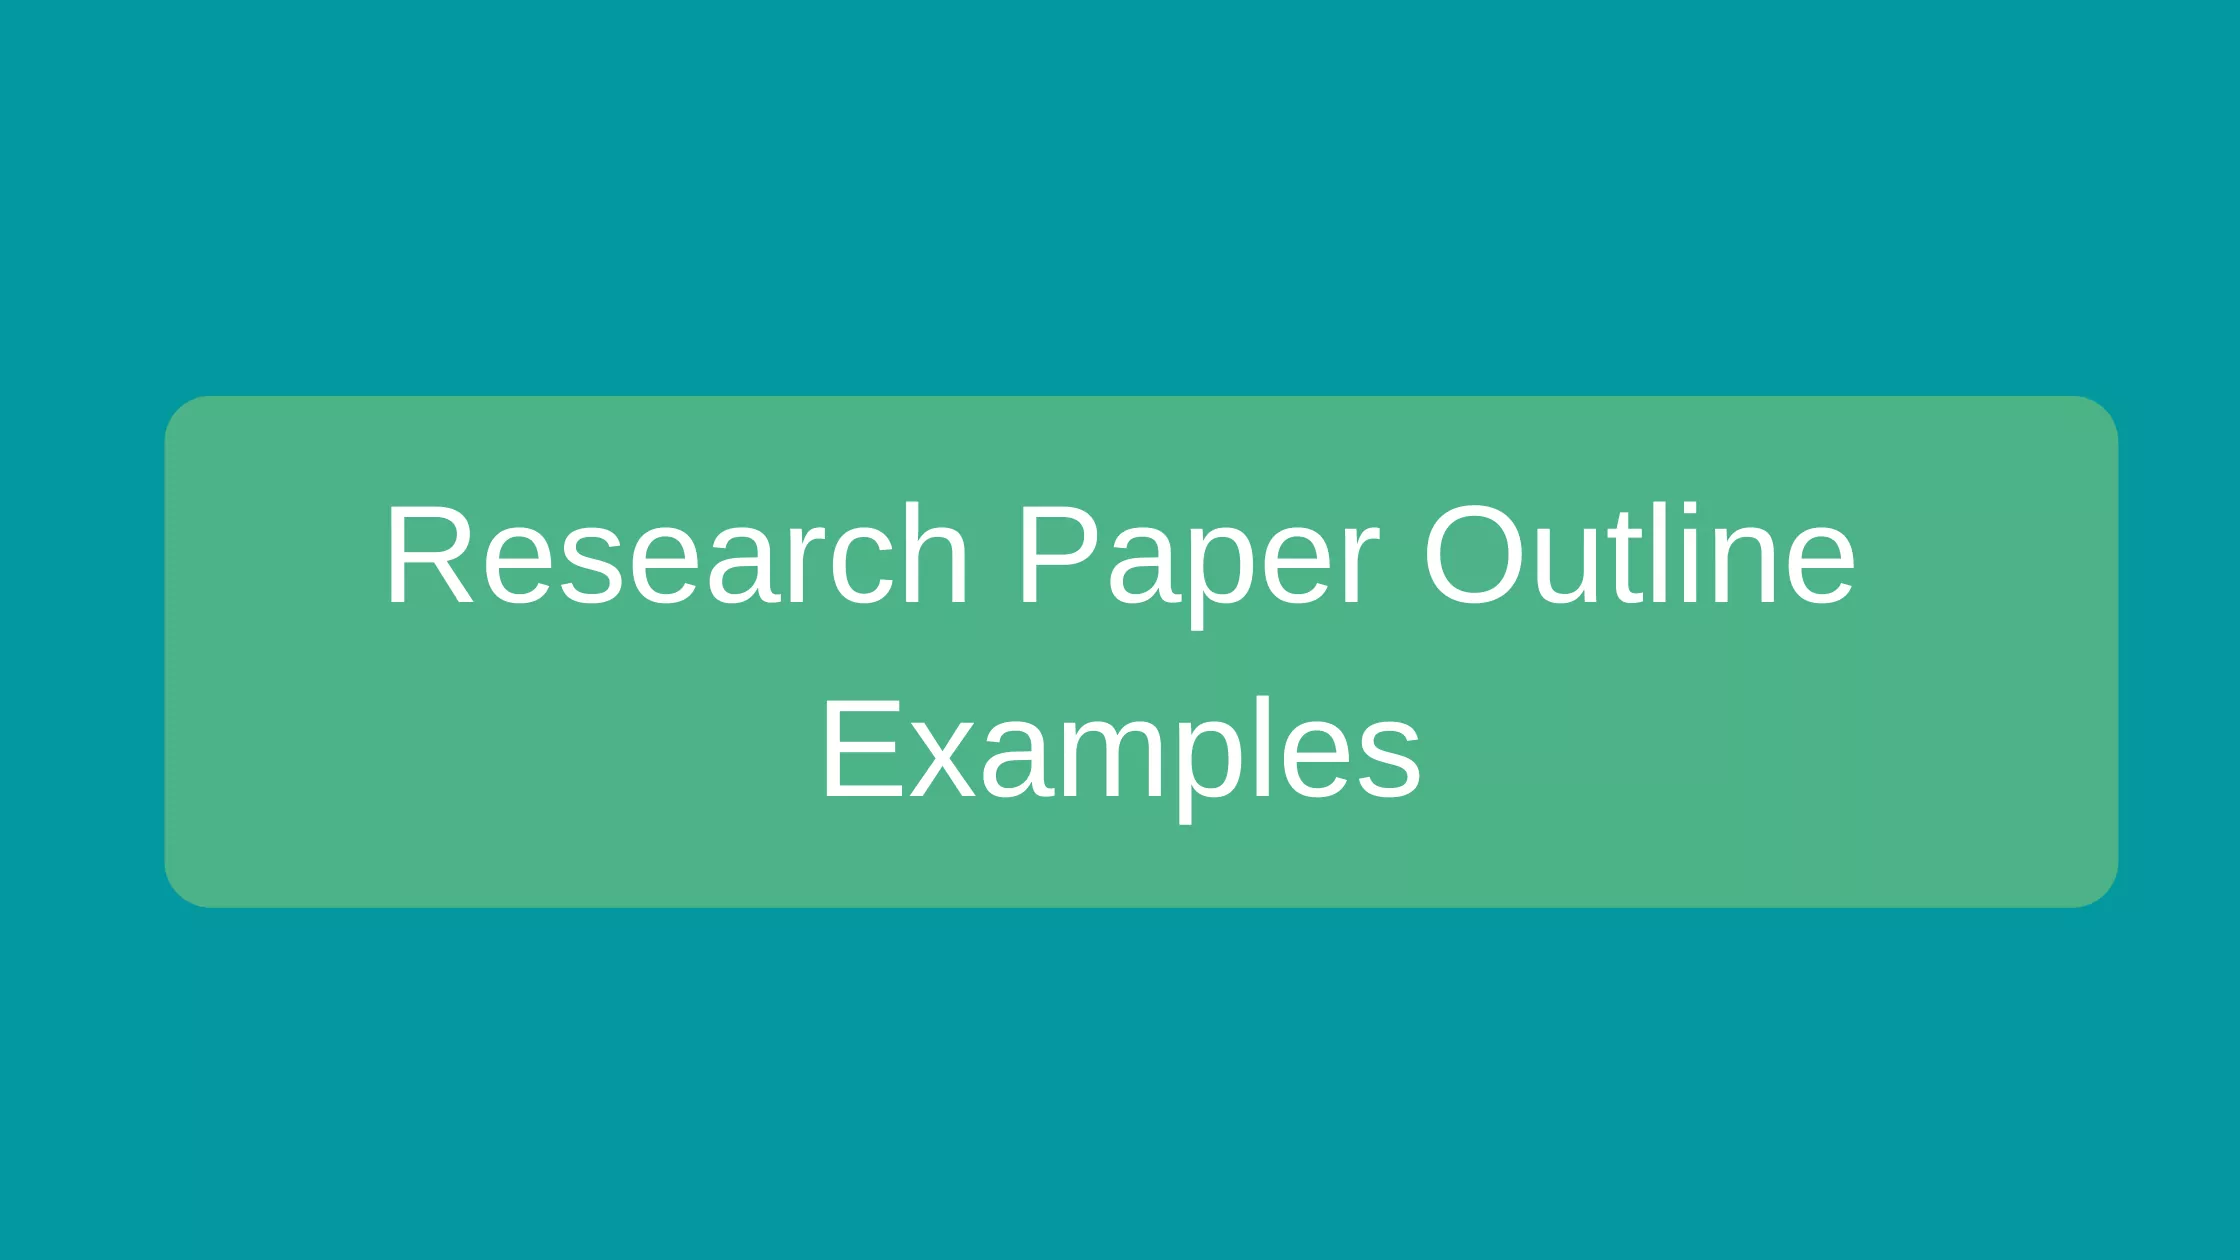 research paper outline example